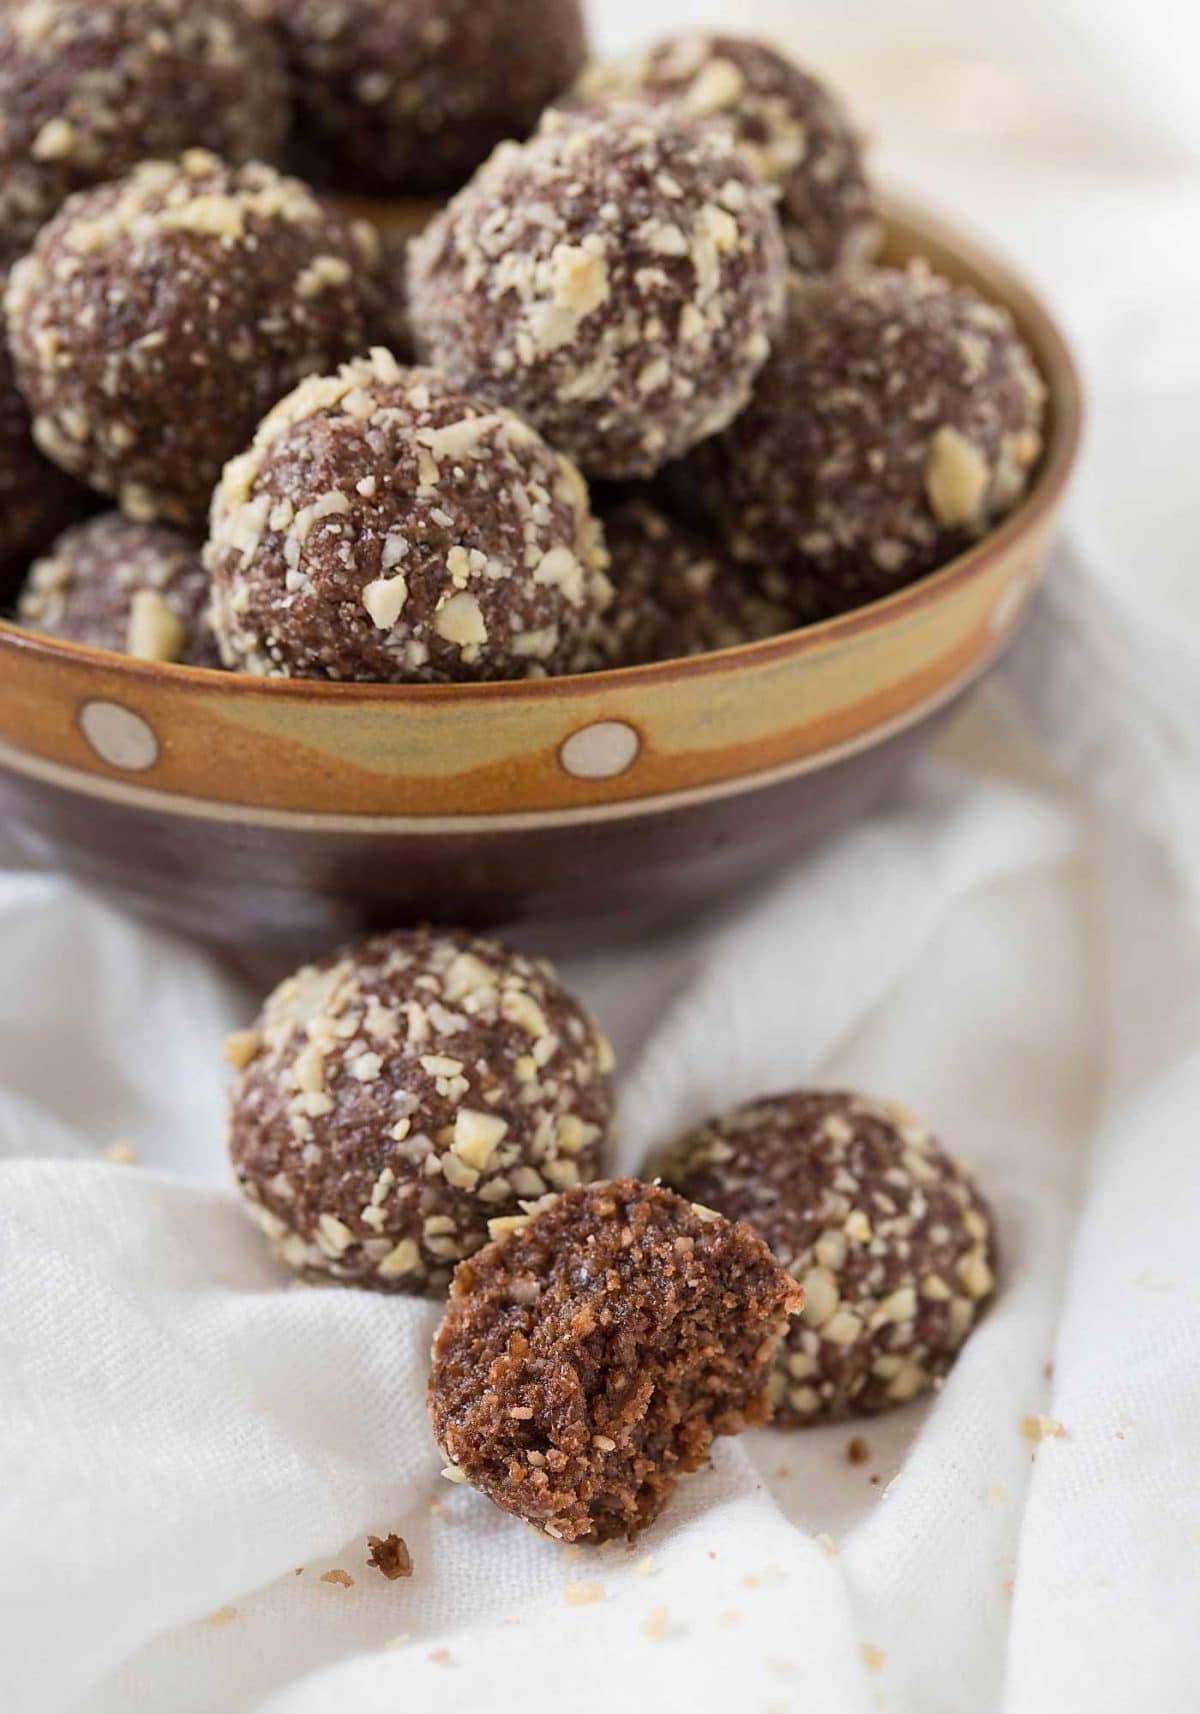 Quick and easy no-bake energy balls are perfect for healthy snacks. These are packed with nutrients and contain NO white sugar